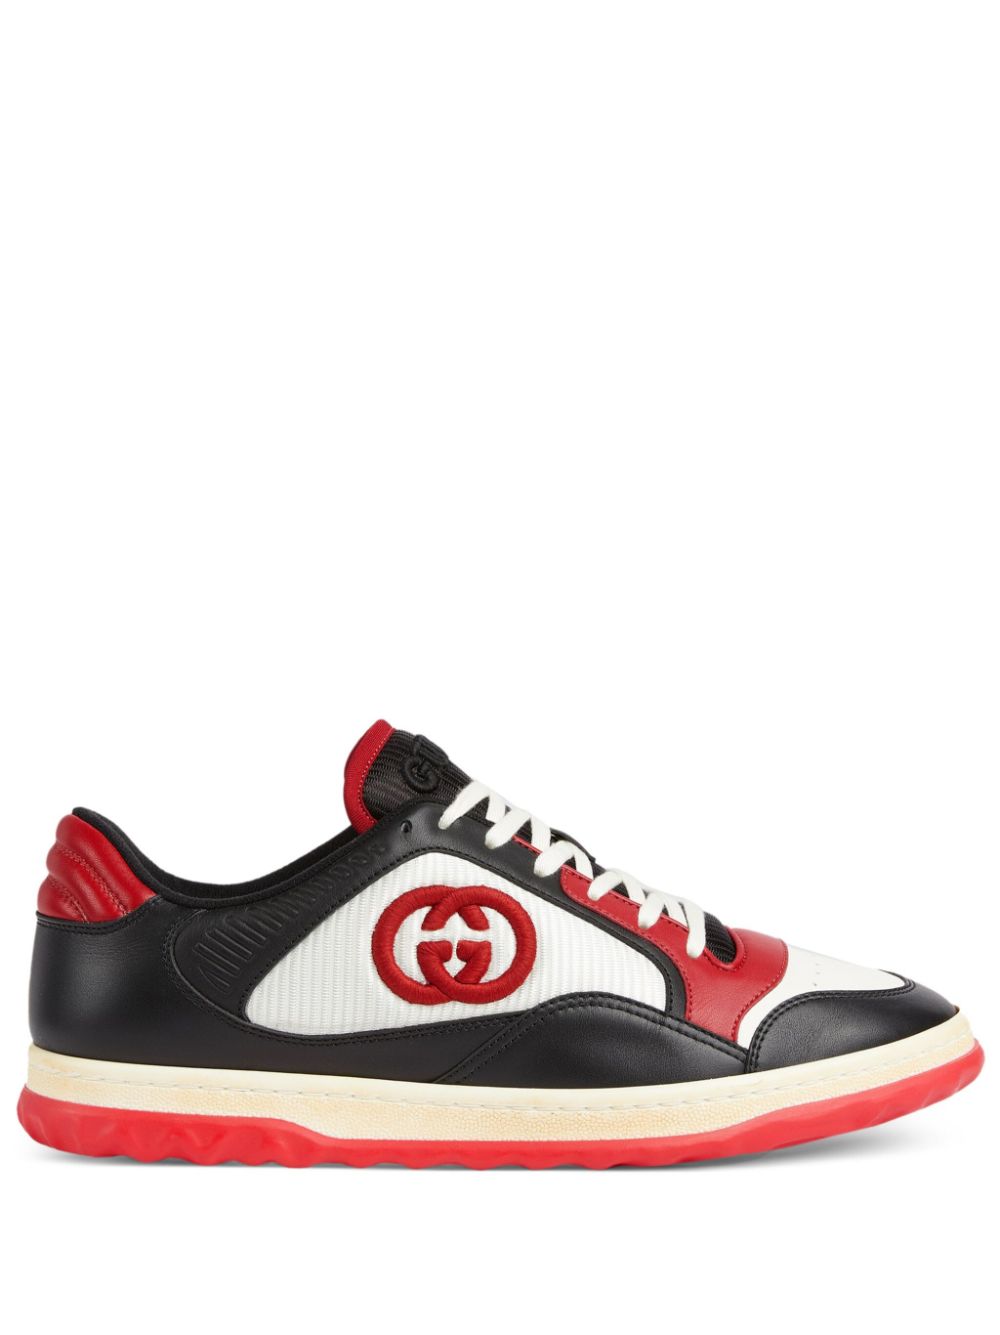 GUCCI Multicolor Leather Sneakers for Men by Luxury Designer, SS24 Collection